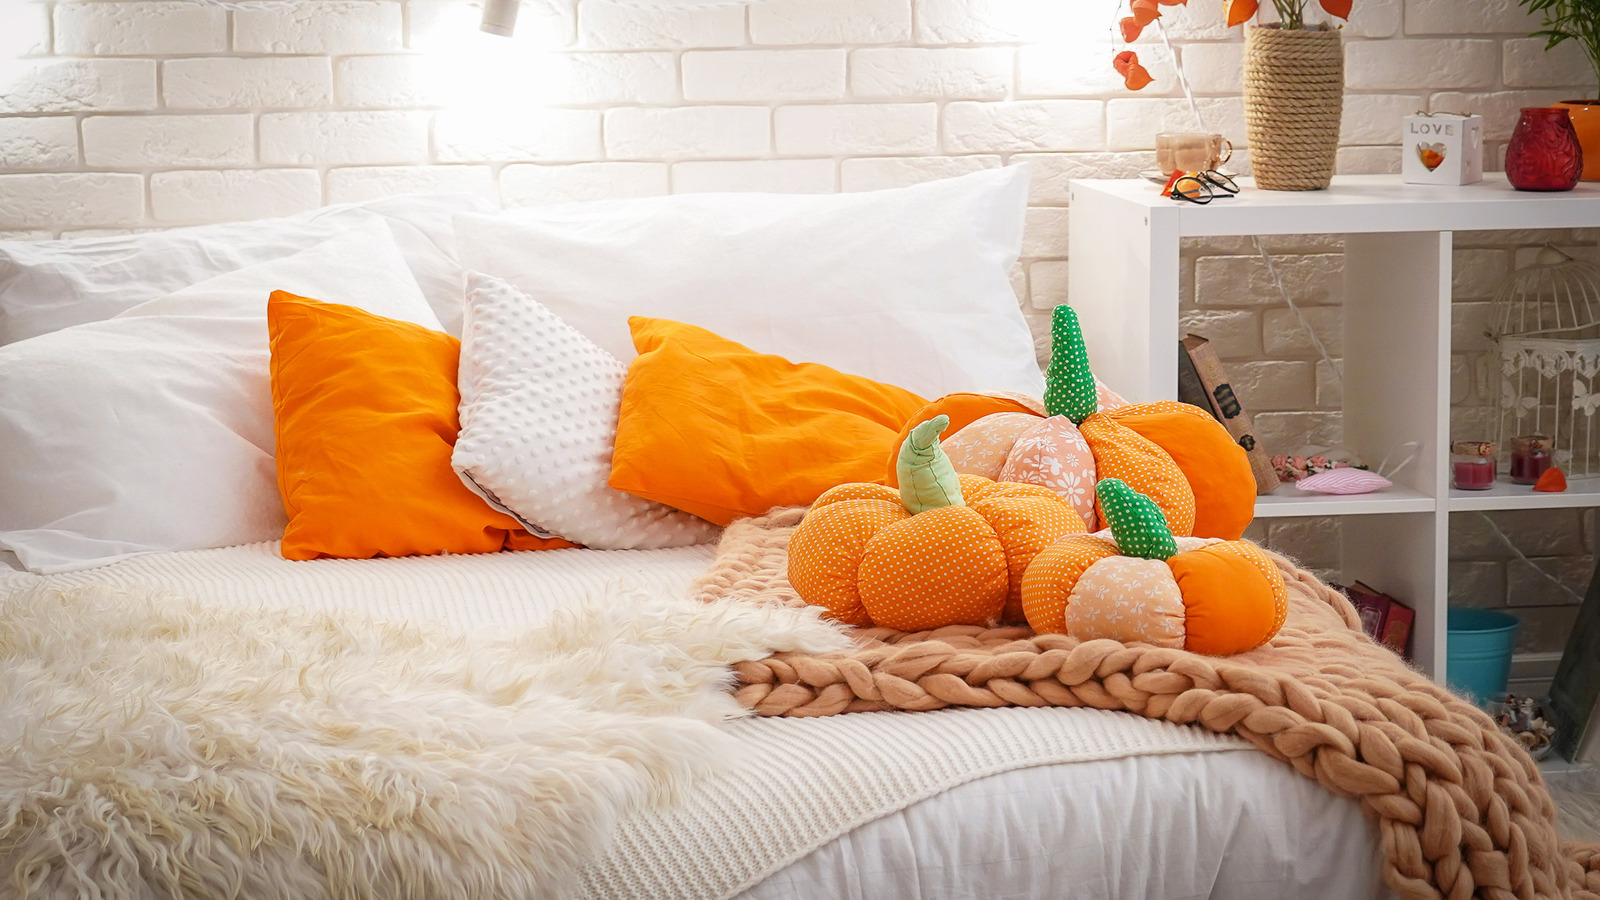 https://www.housedigest.com/img/gallery/20-throw-pillows-you-can-make-that-are-perfect-for-fall/l-intro-1663085576.jpg